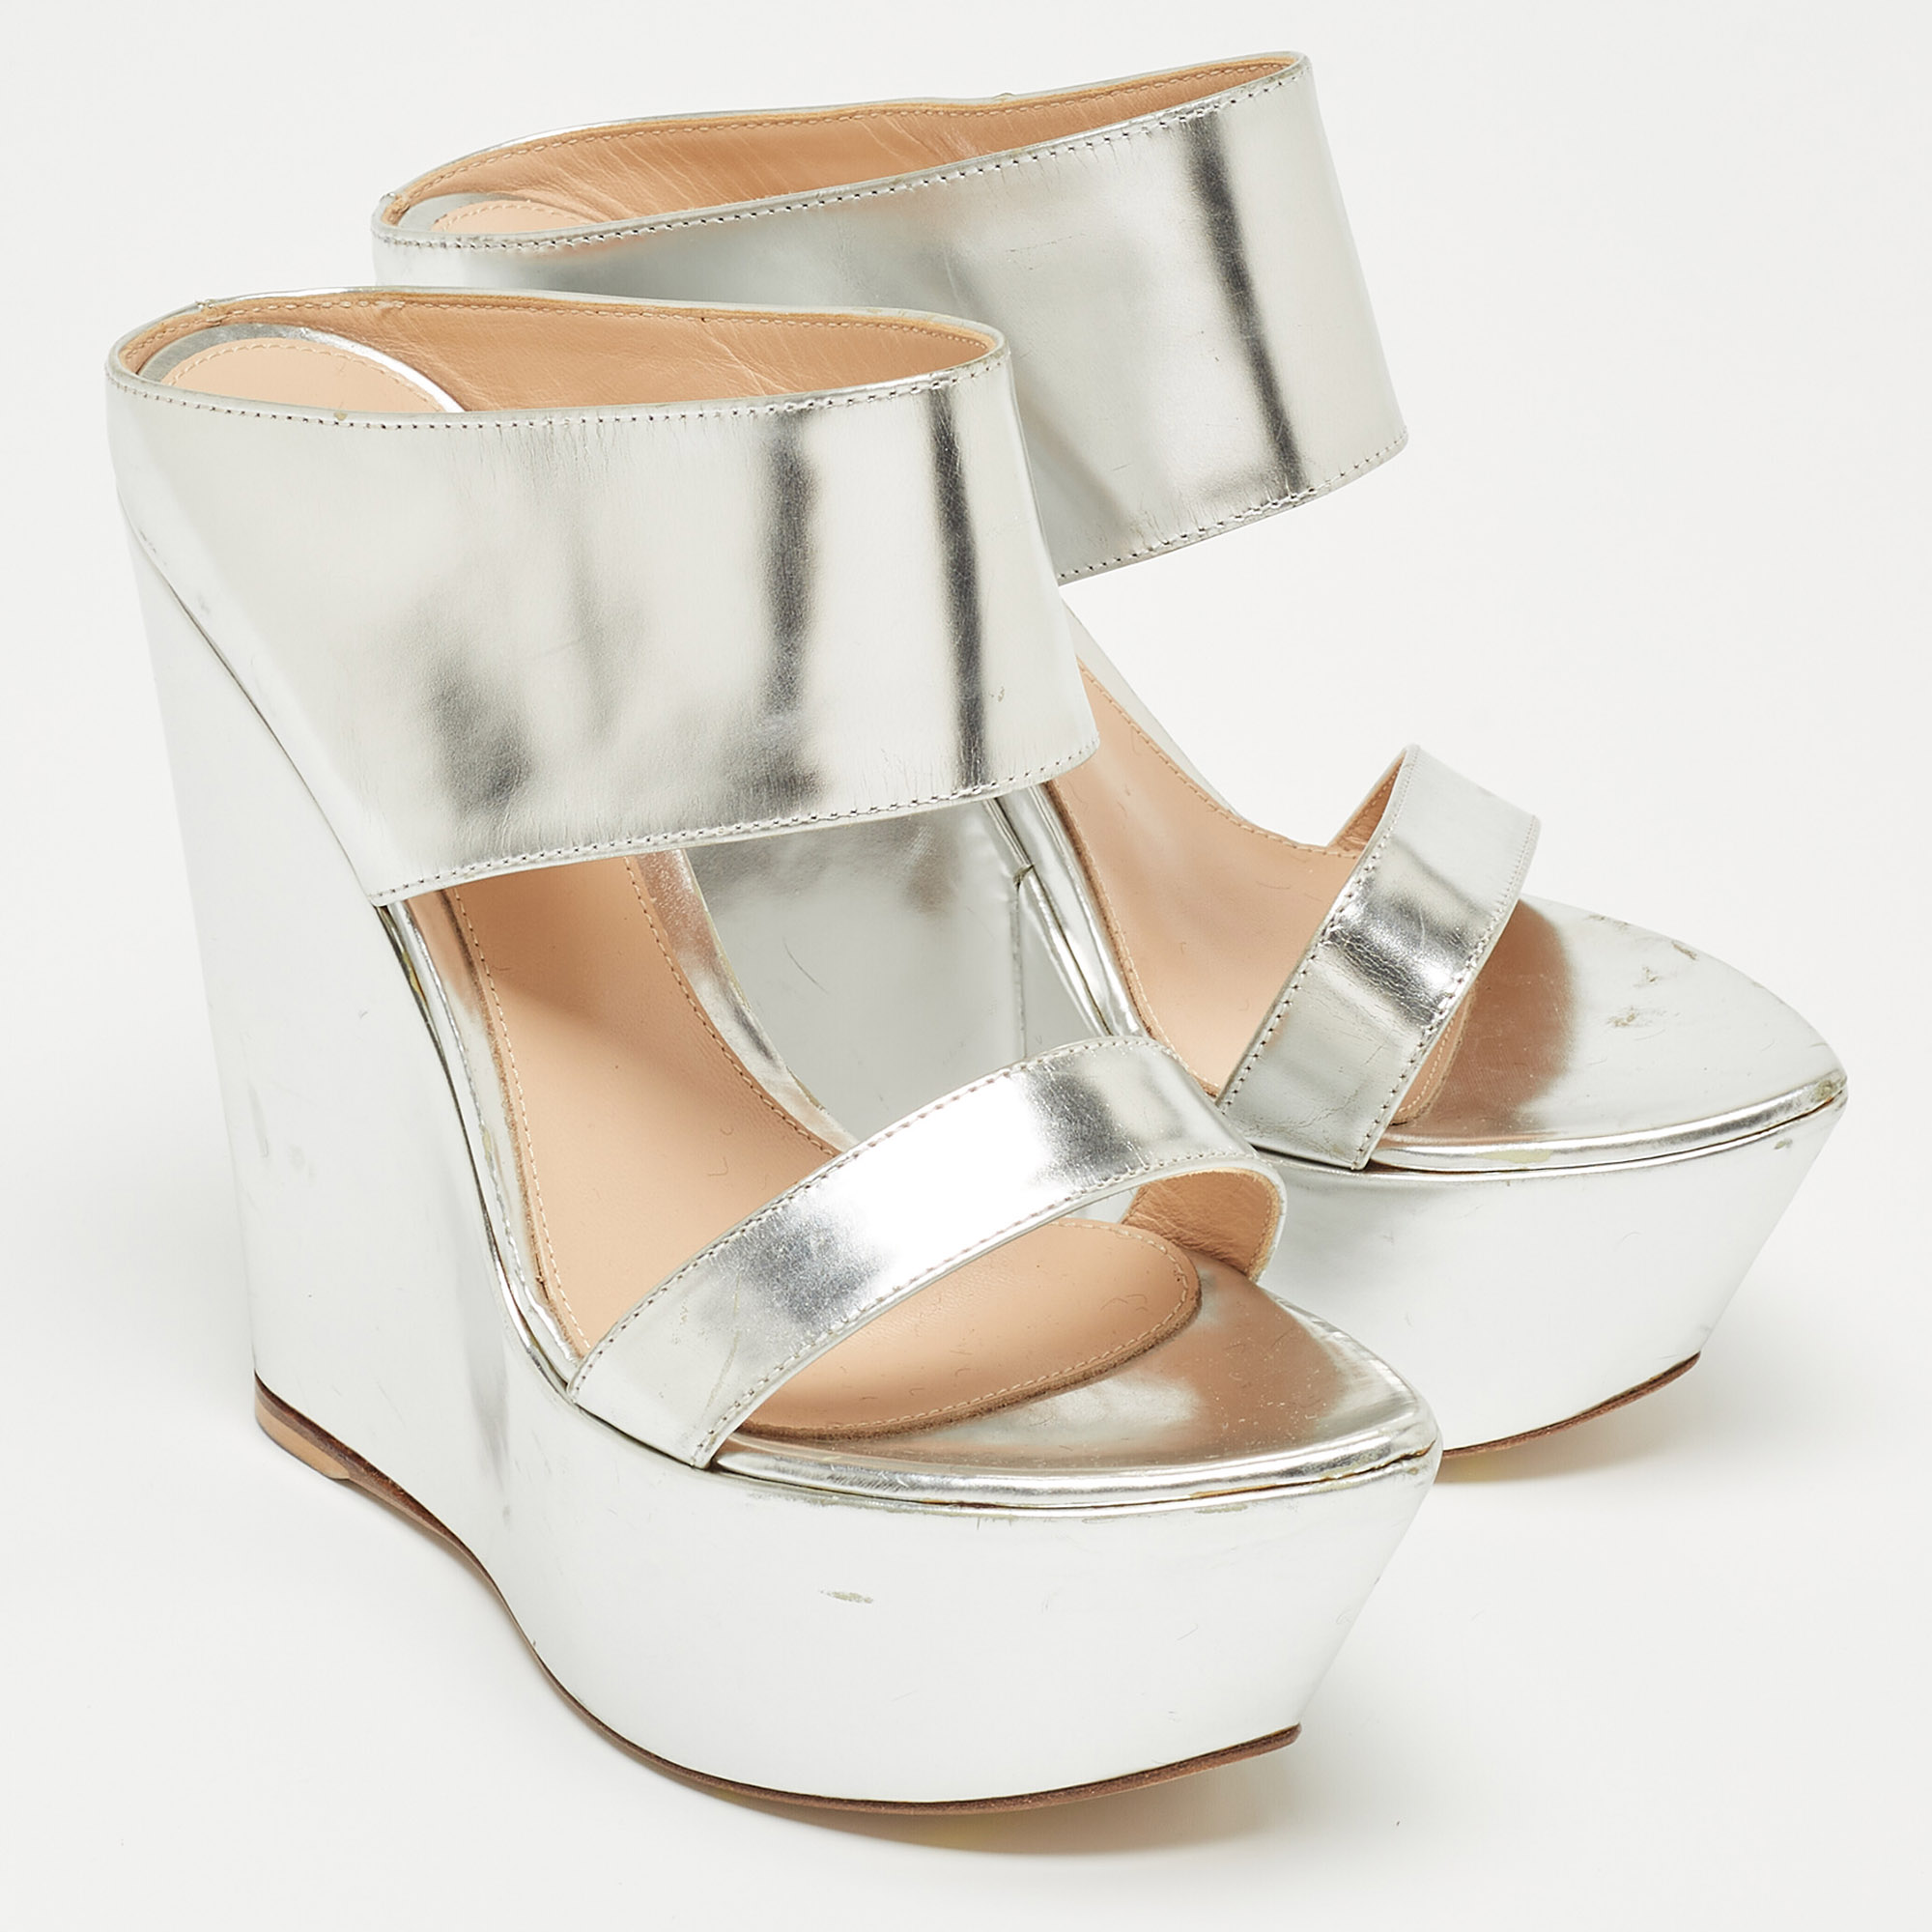 Gianvito Rossi Silver Leather Wedge Slide Sandals Size 36